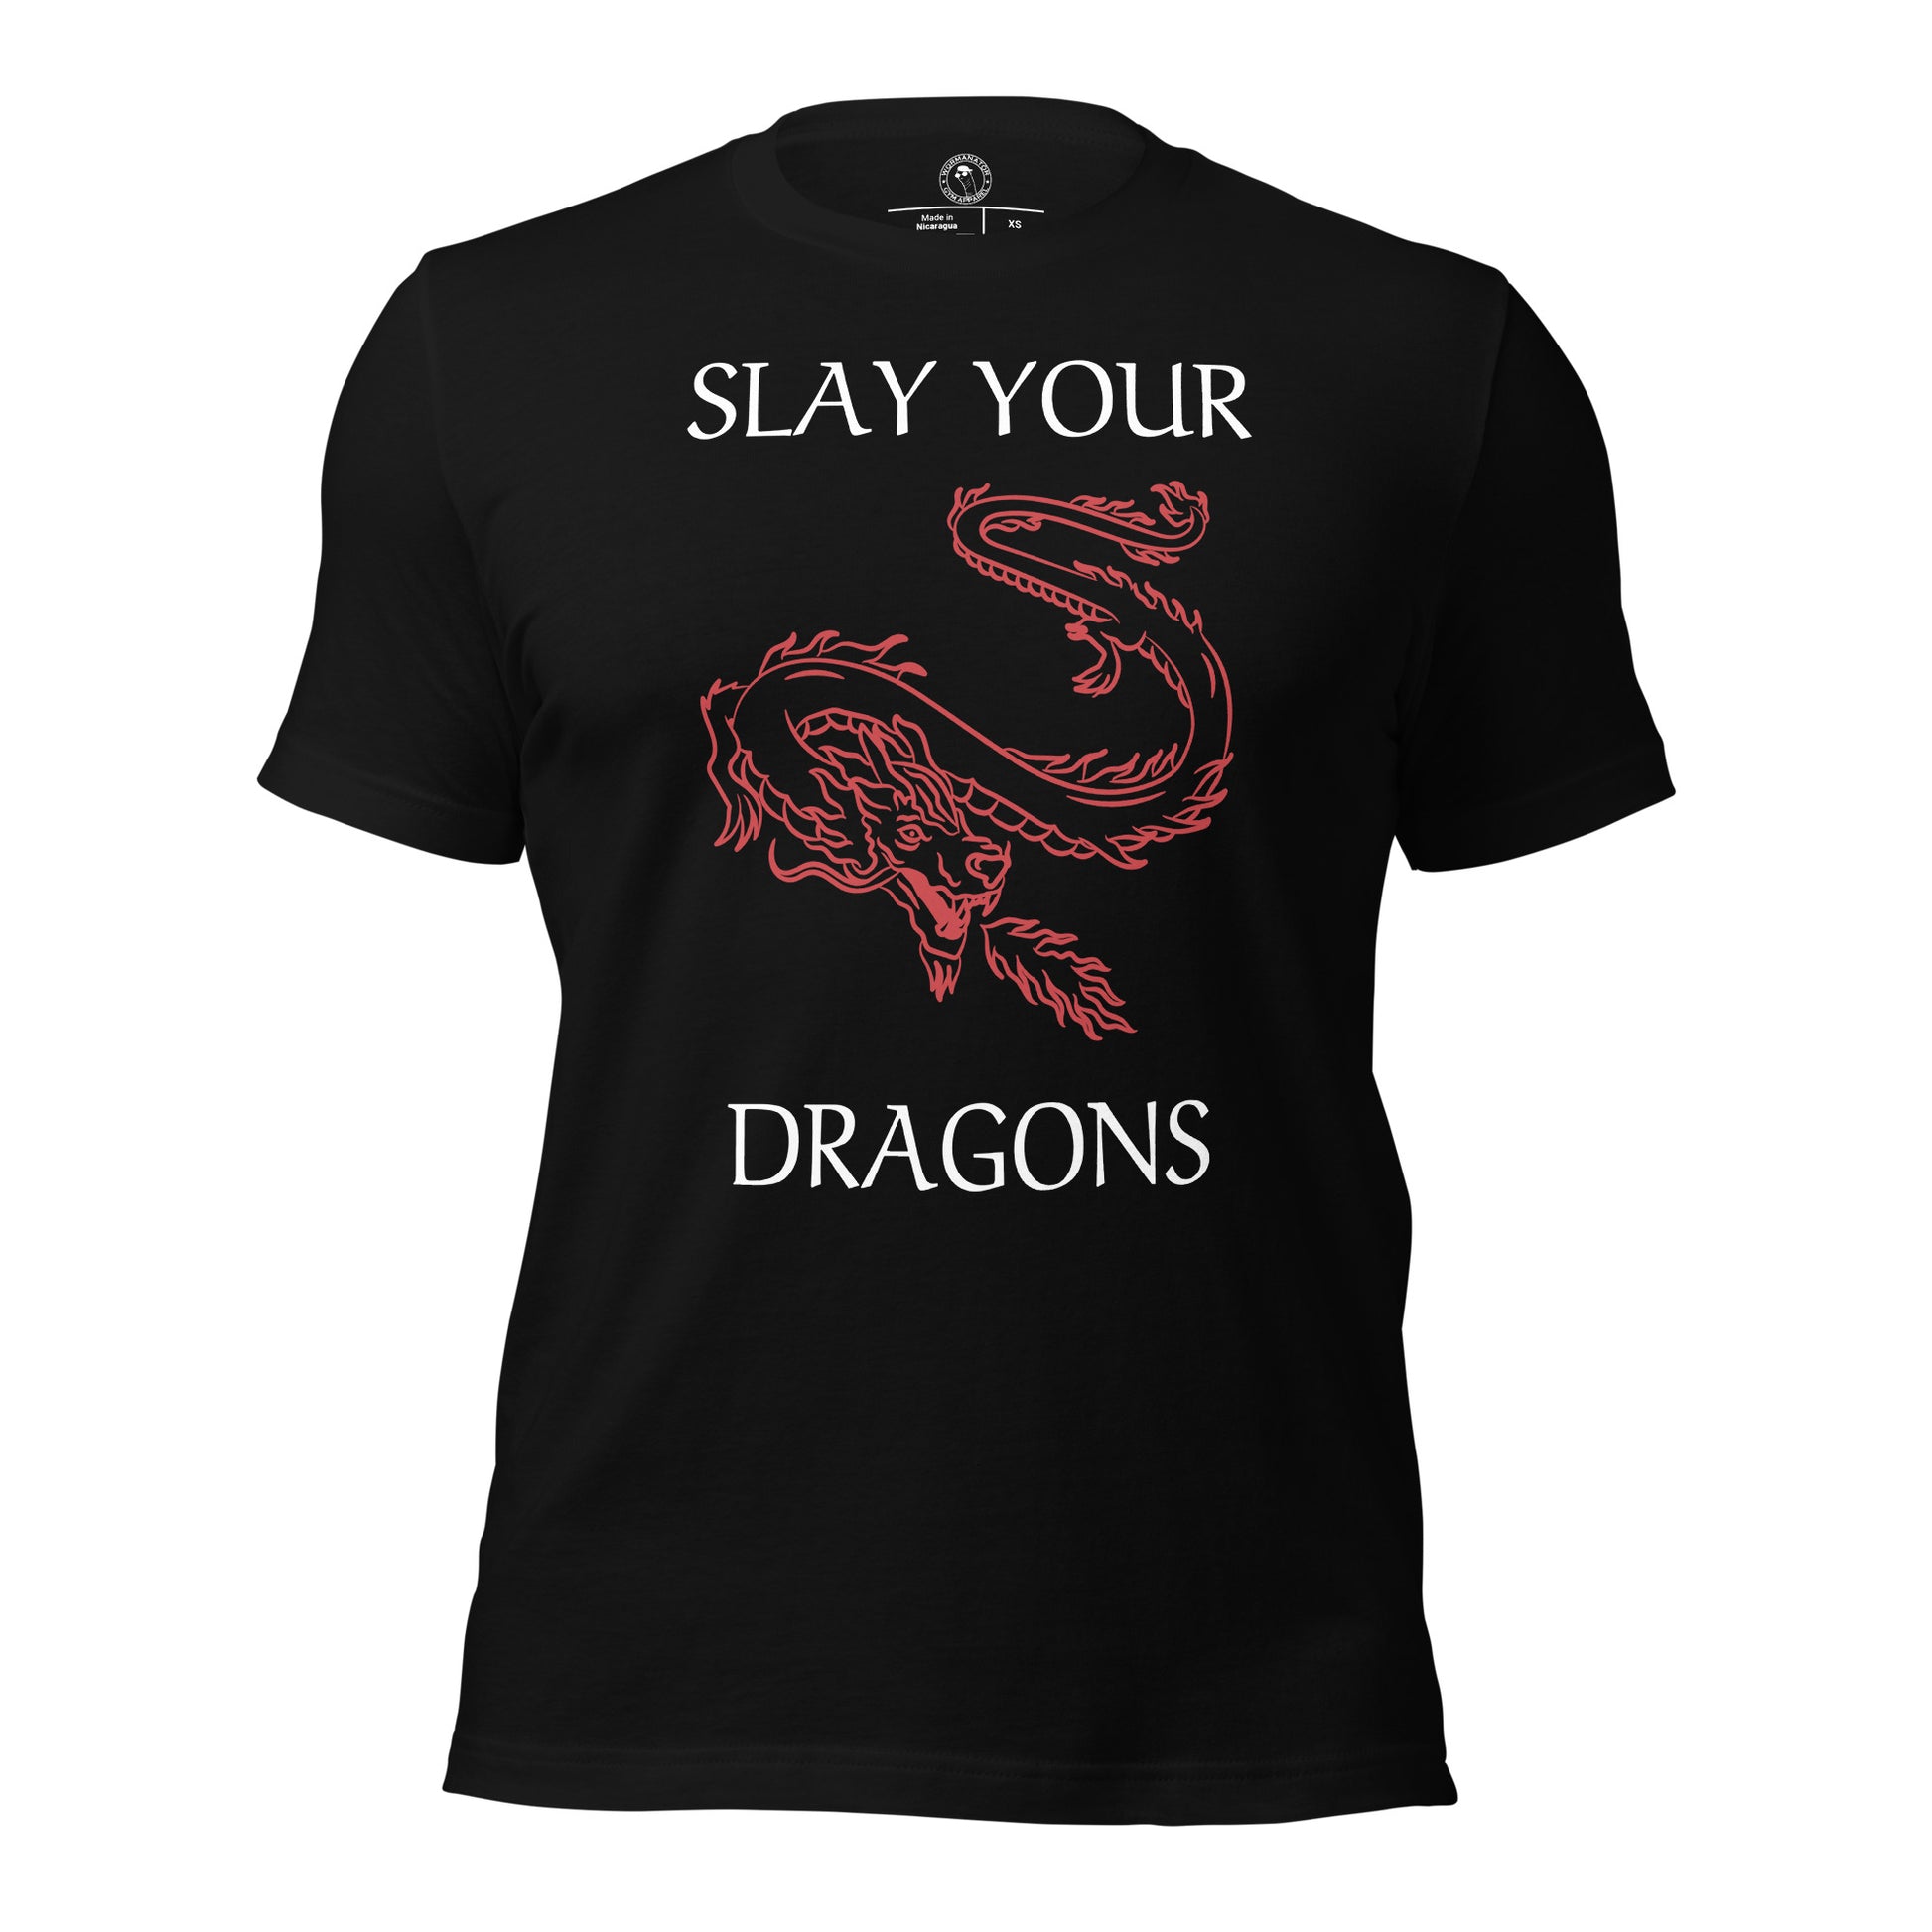 Slay Your Dragons Shirt in Black